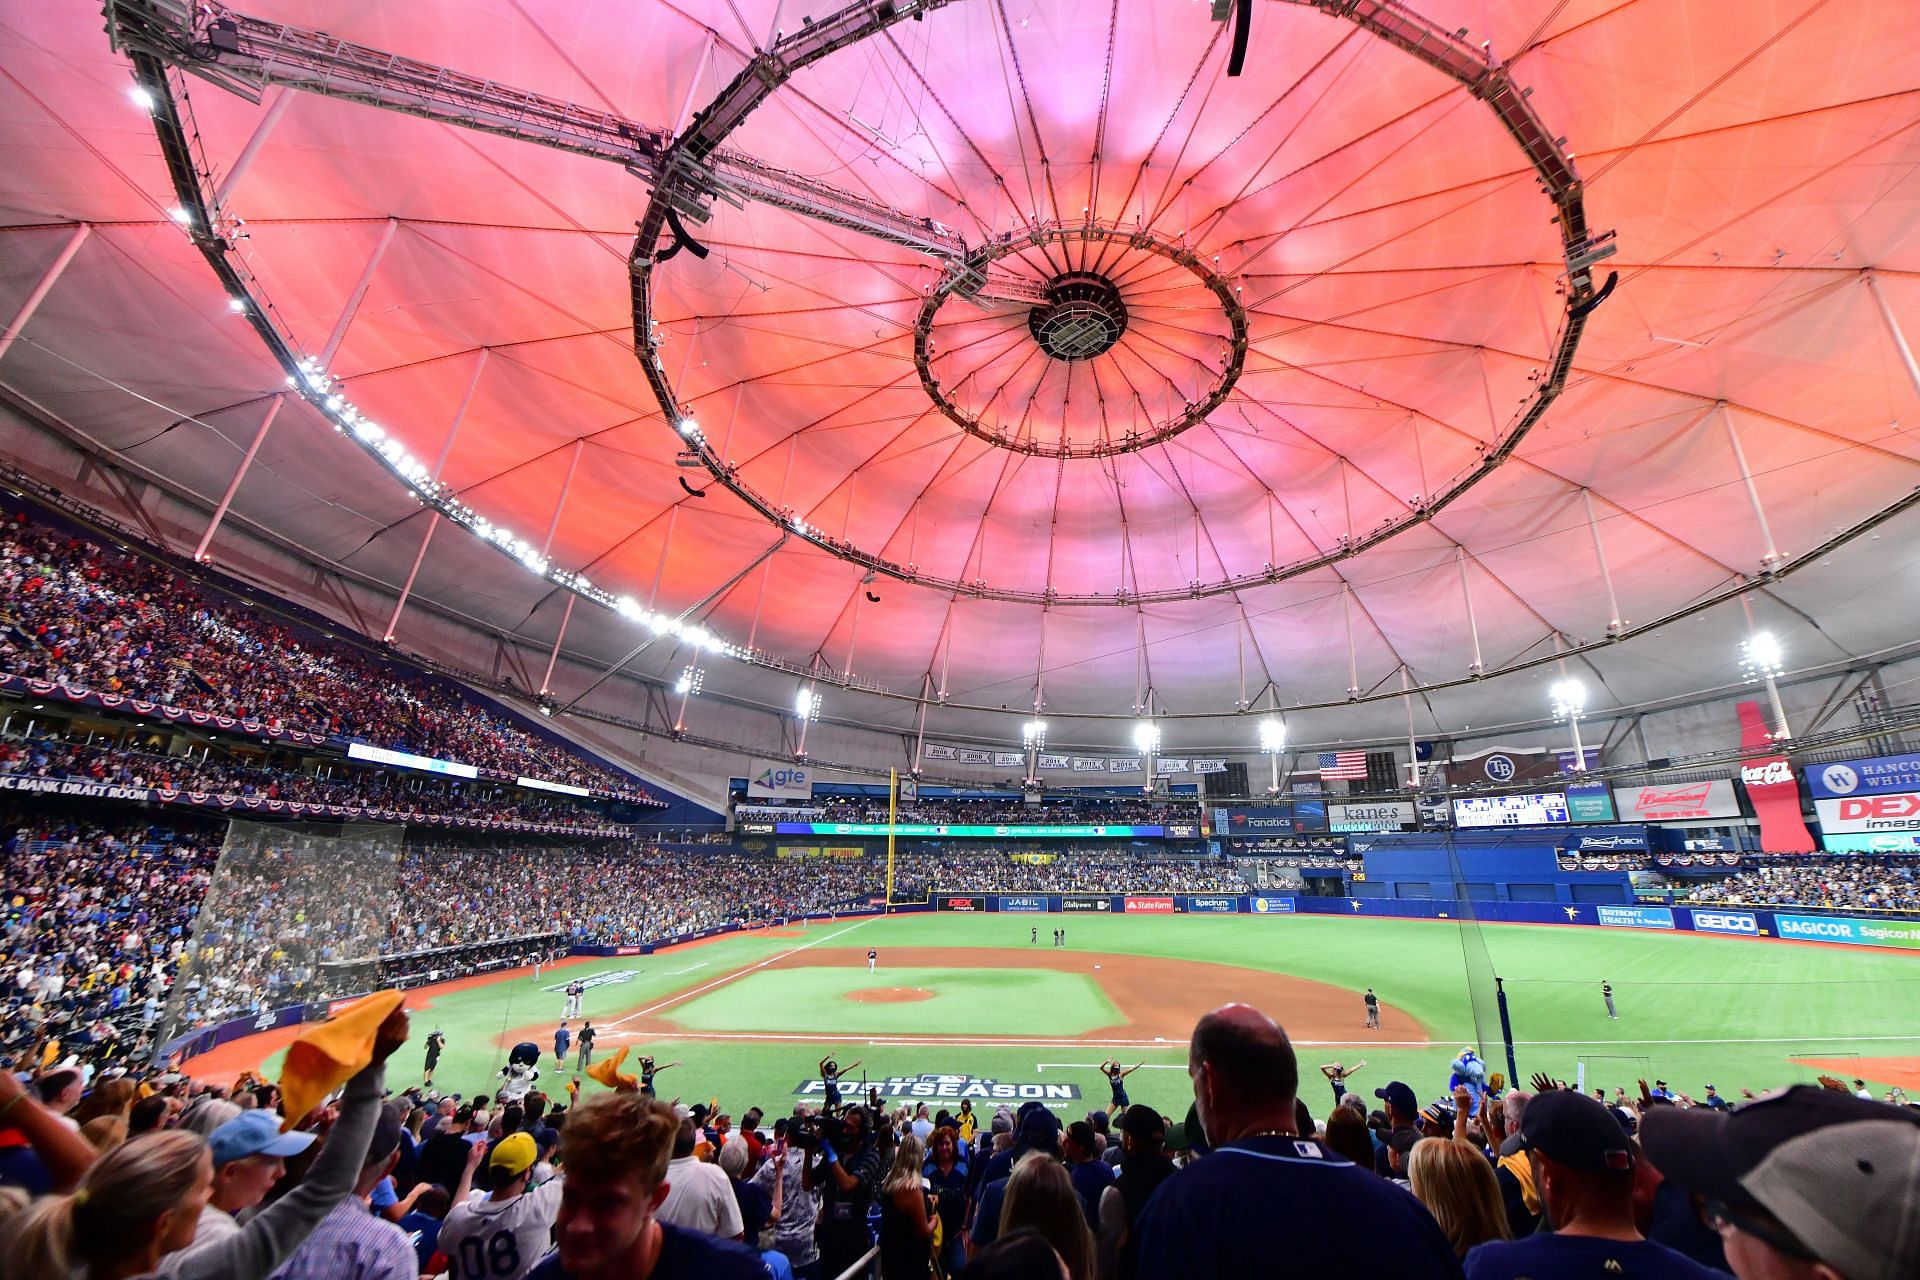 Tampa Bay Rays fans react to club's relocation to new stadium in